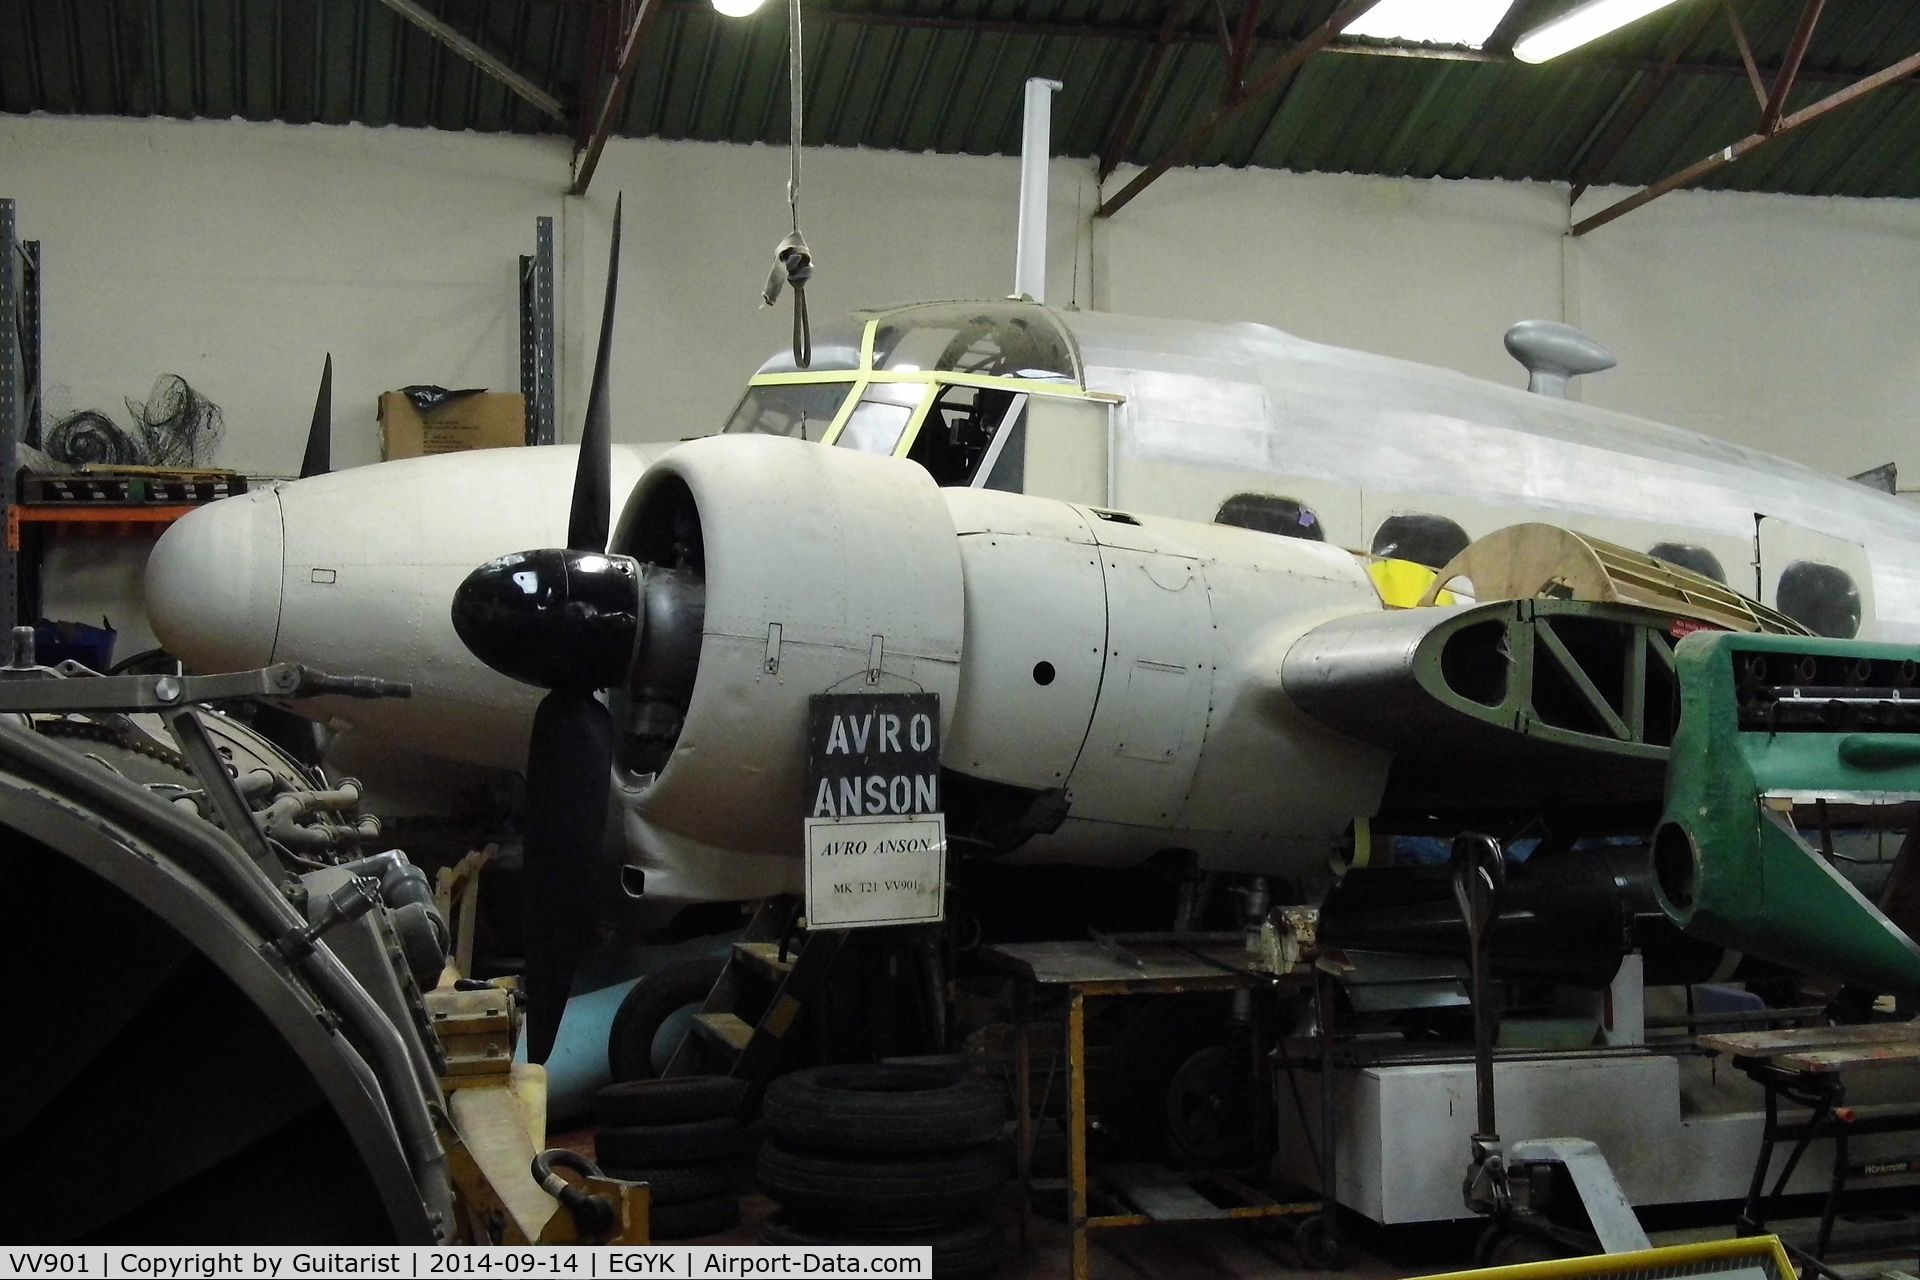 VV901, 1949 Avro 652A Anson T.21 C/N Not found VV901, In the workshop at the York Air Museum